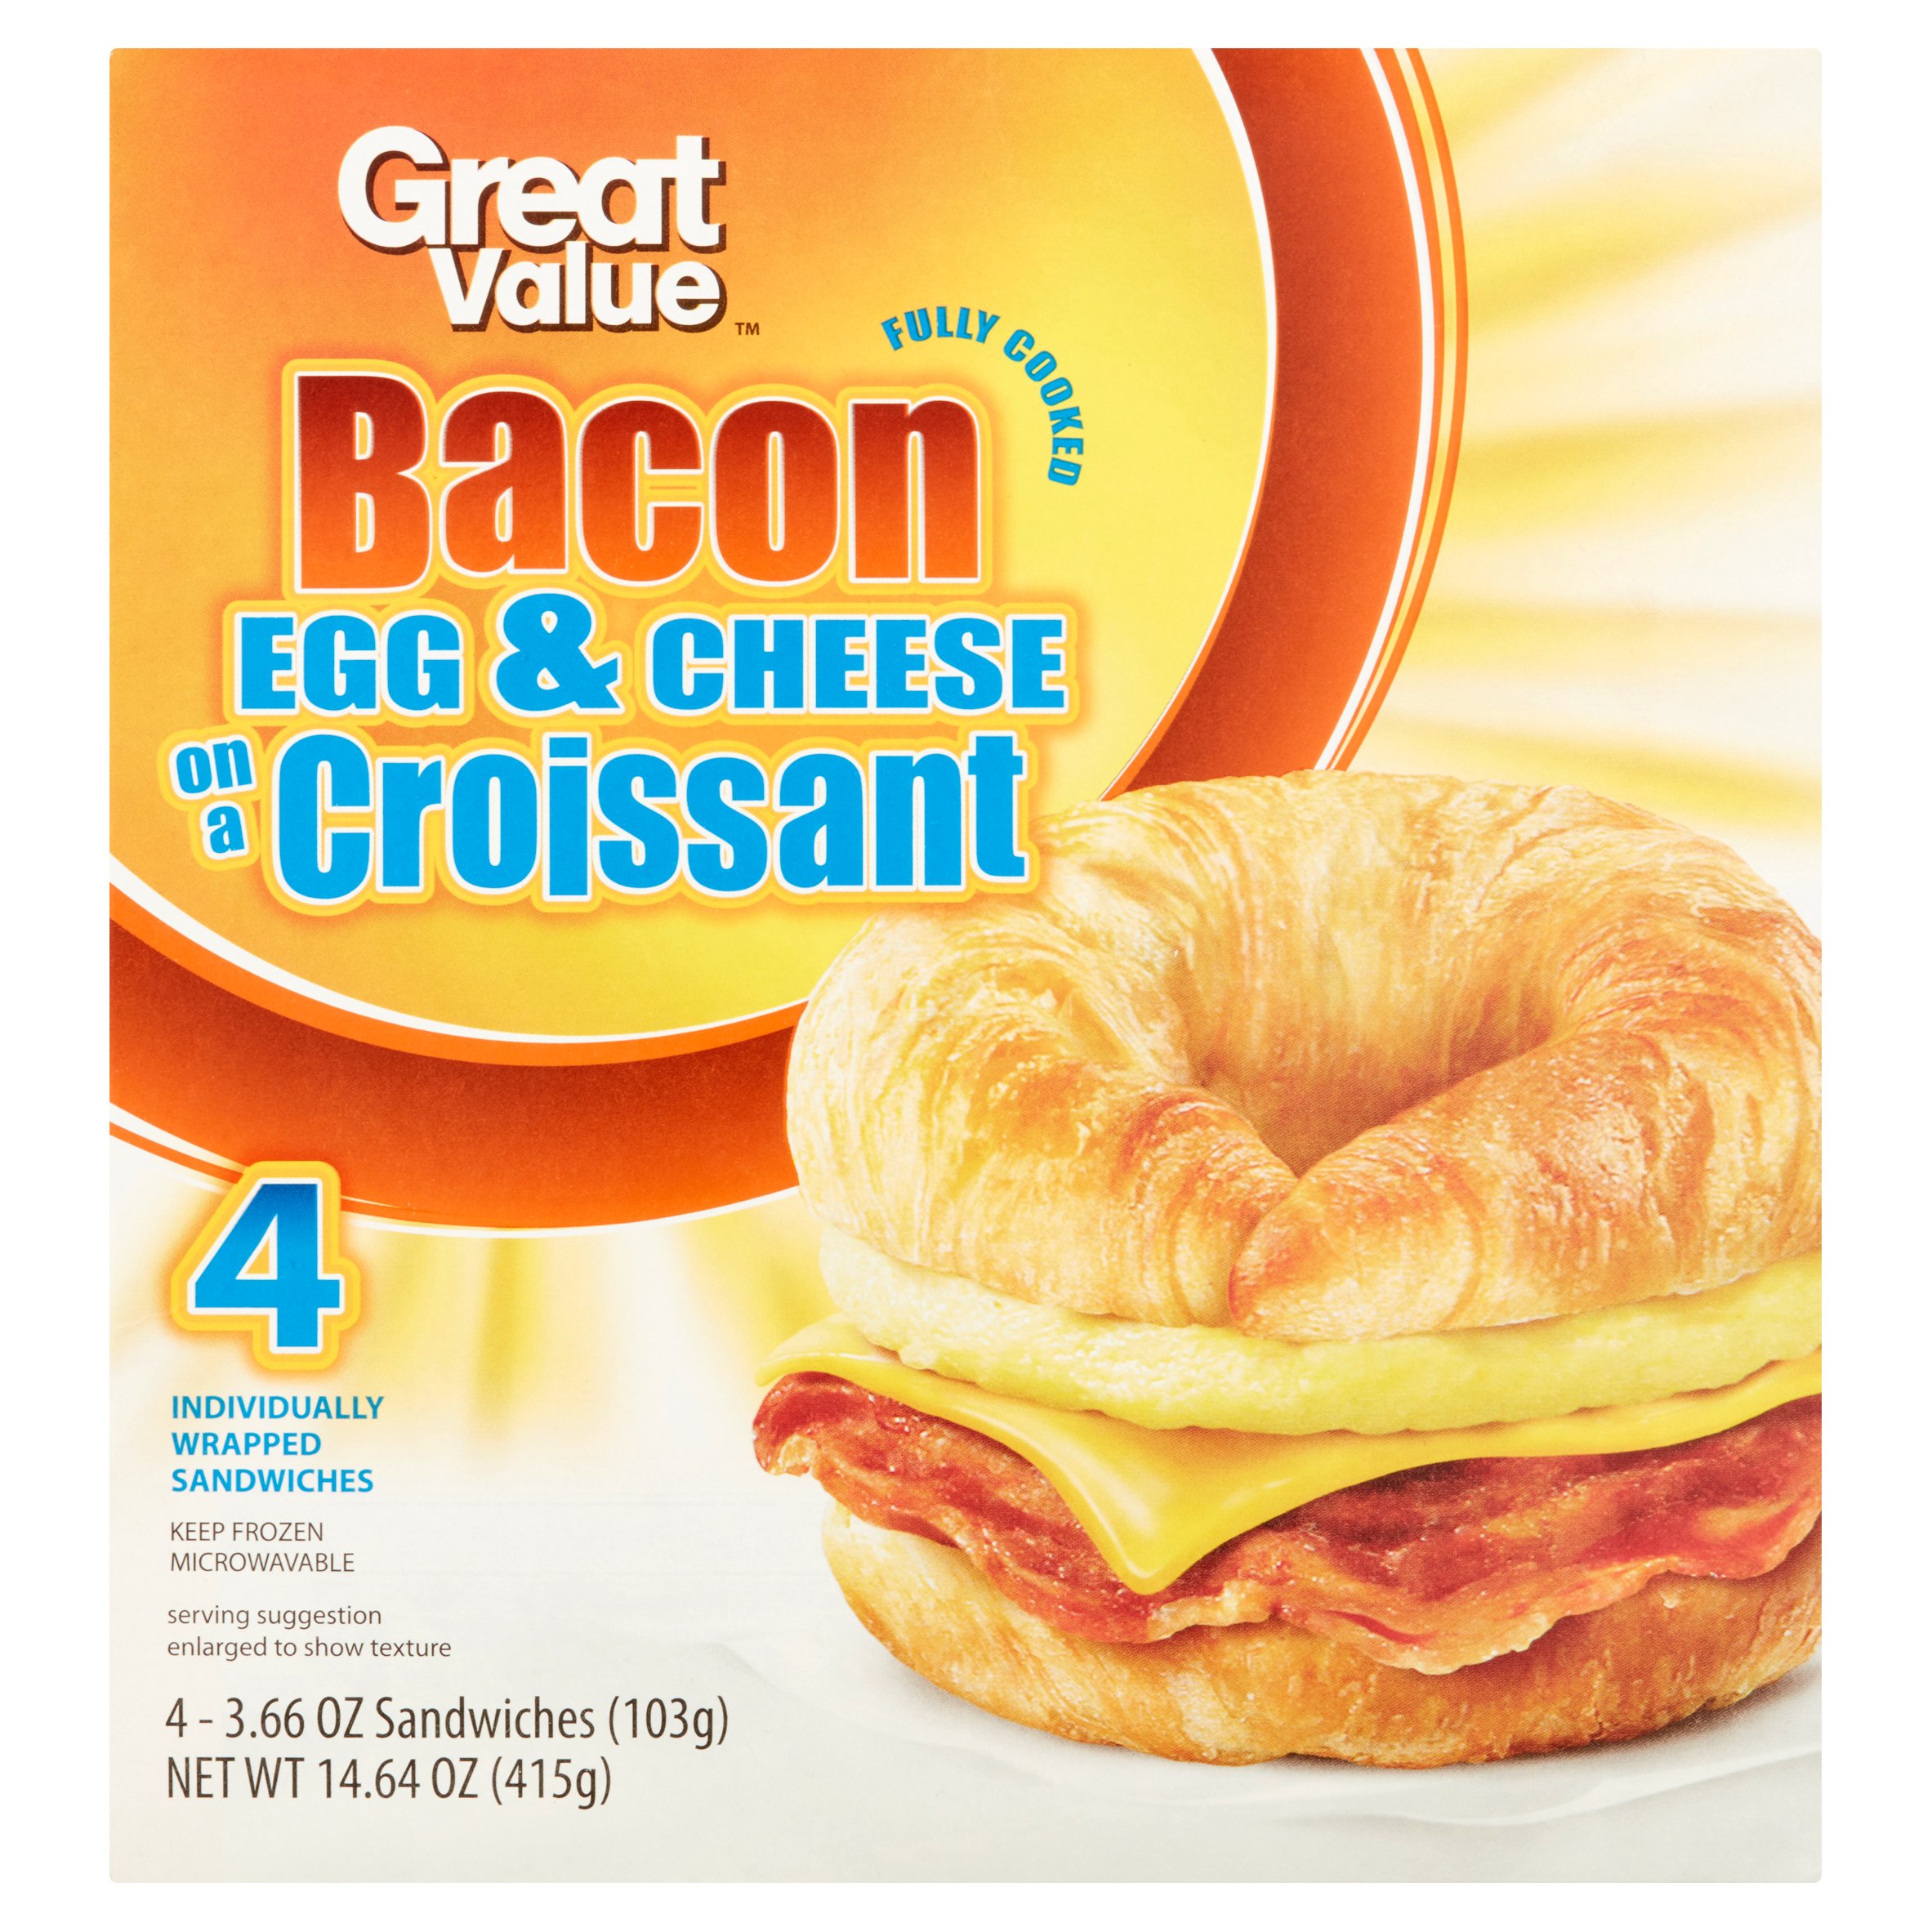 Great Value Fully Cooked Bacon Egg & Cheese on a Croissant Sandwiches, 3.66 Oz, 4 Count